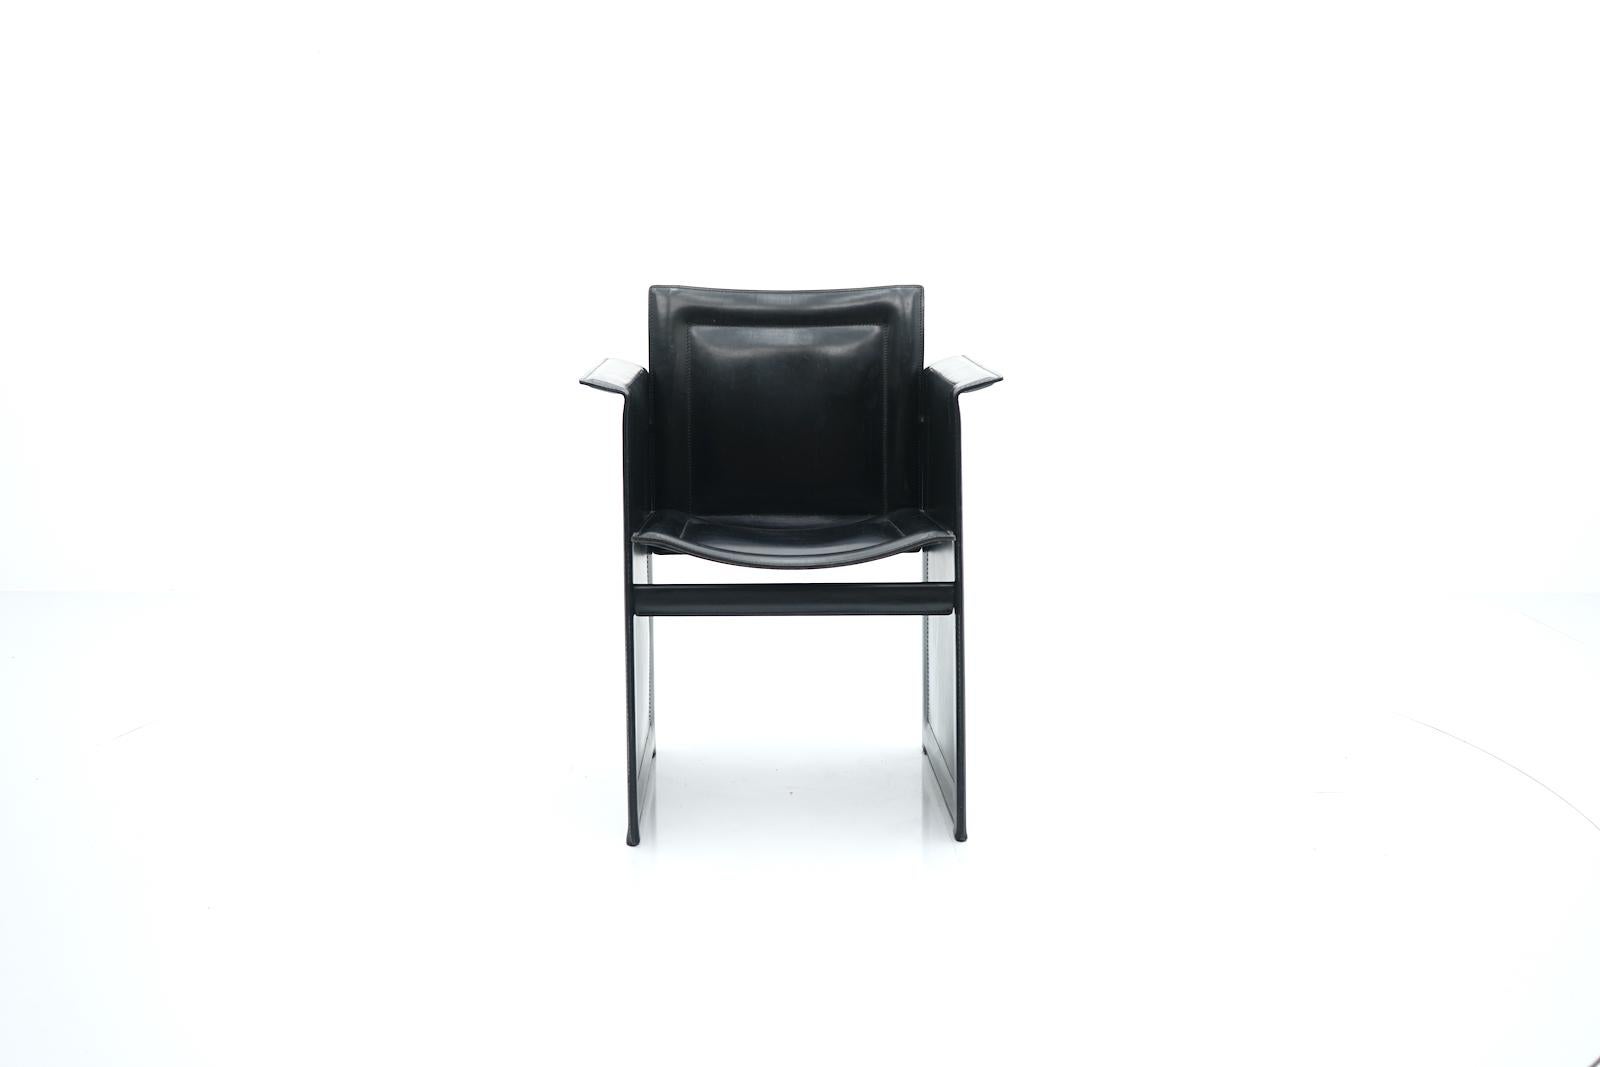 Solaria Armchair made b Arrben Italy 1980s in black leather.
Measures: H 86 cm, W 64 cm, D 52 cm, SH 45 cm.
Good condition with very nice patina.

Details

Creator: Arrben (Designer)
Period: 1980s
Color: black
Style: Post Modern
Place of